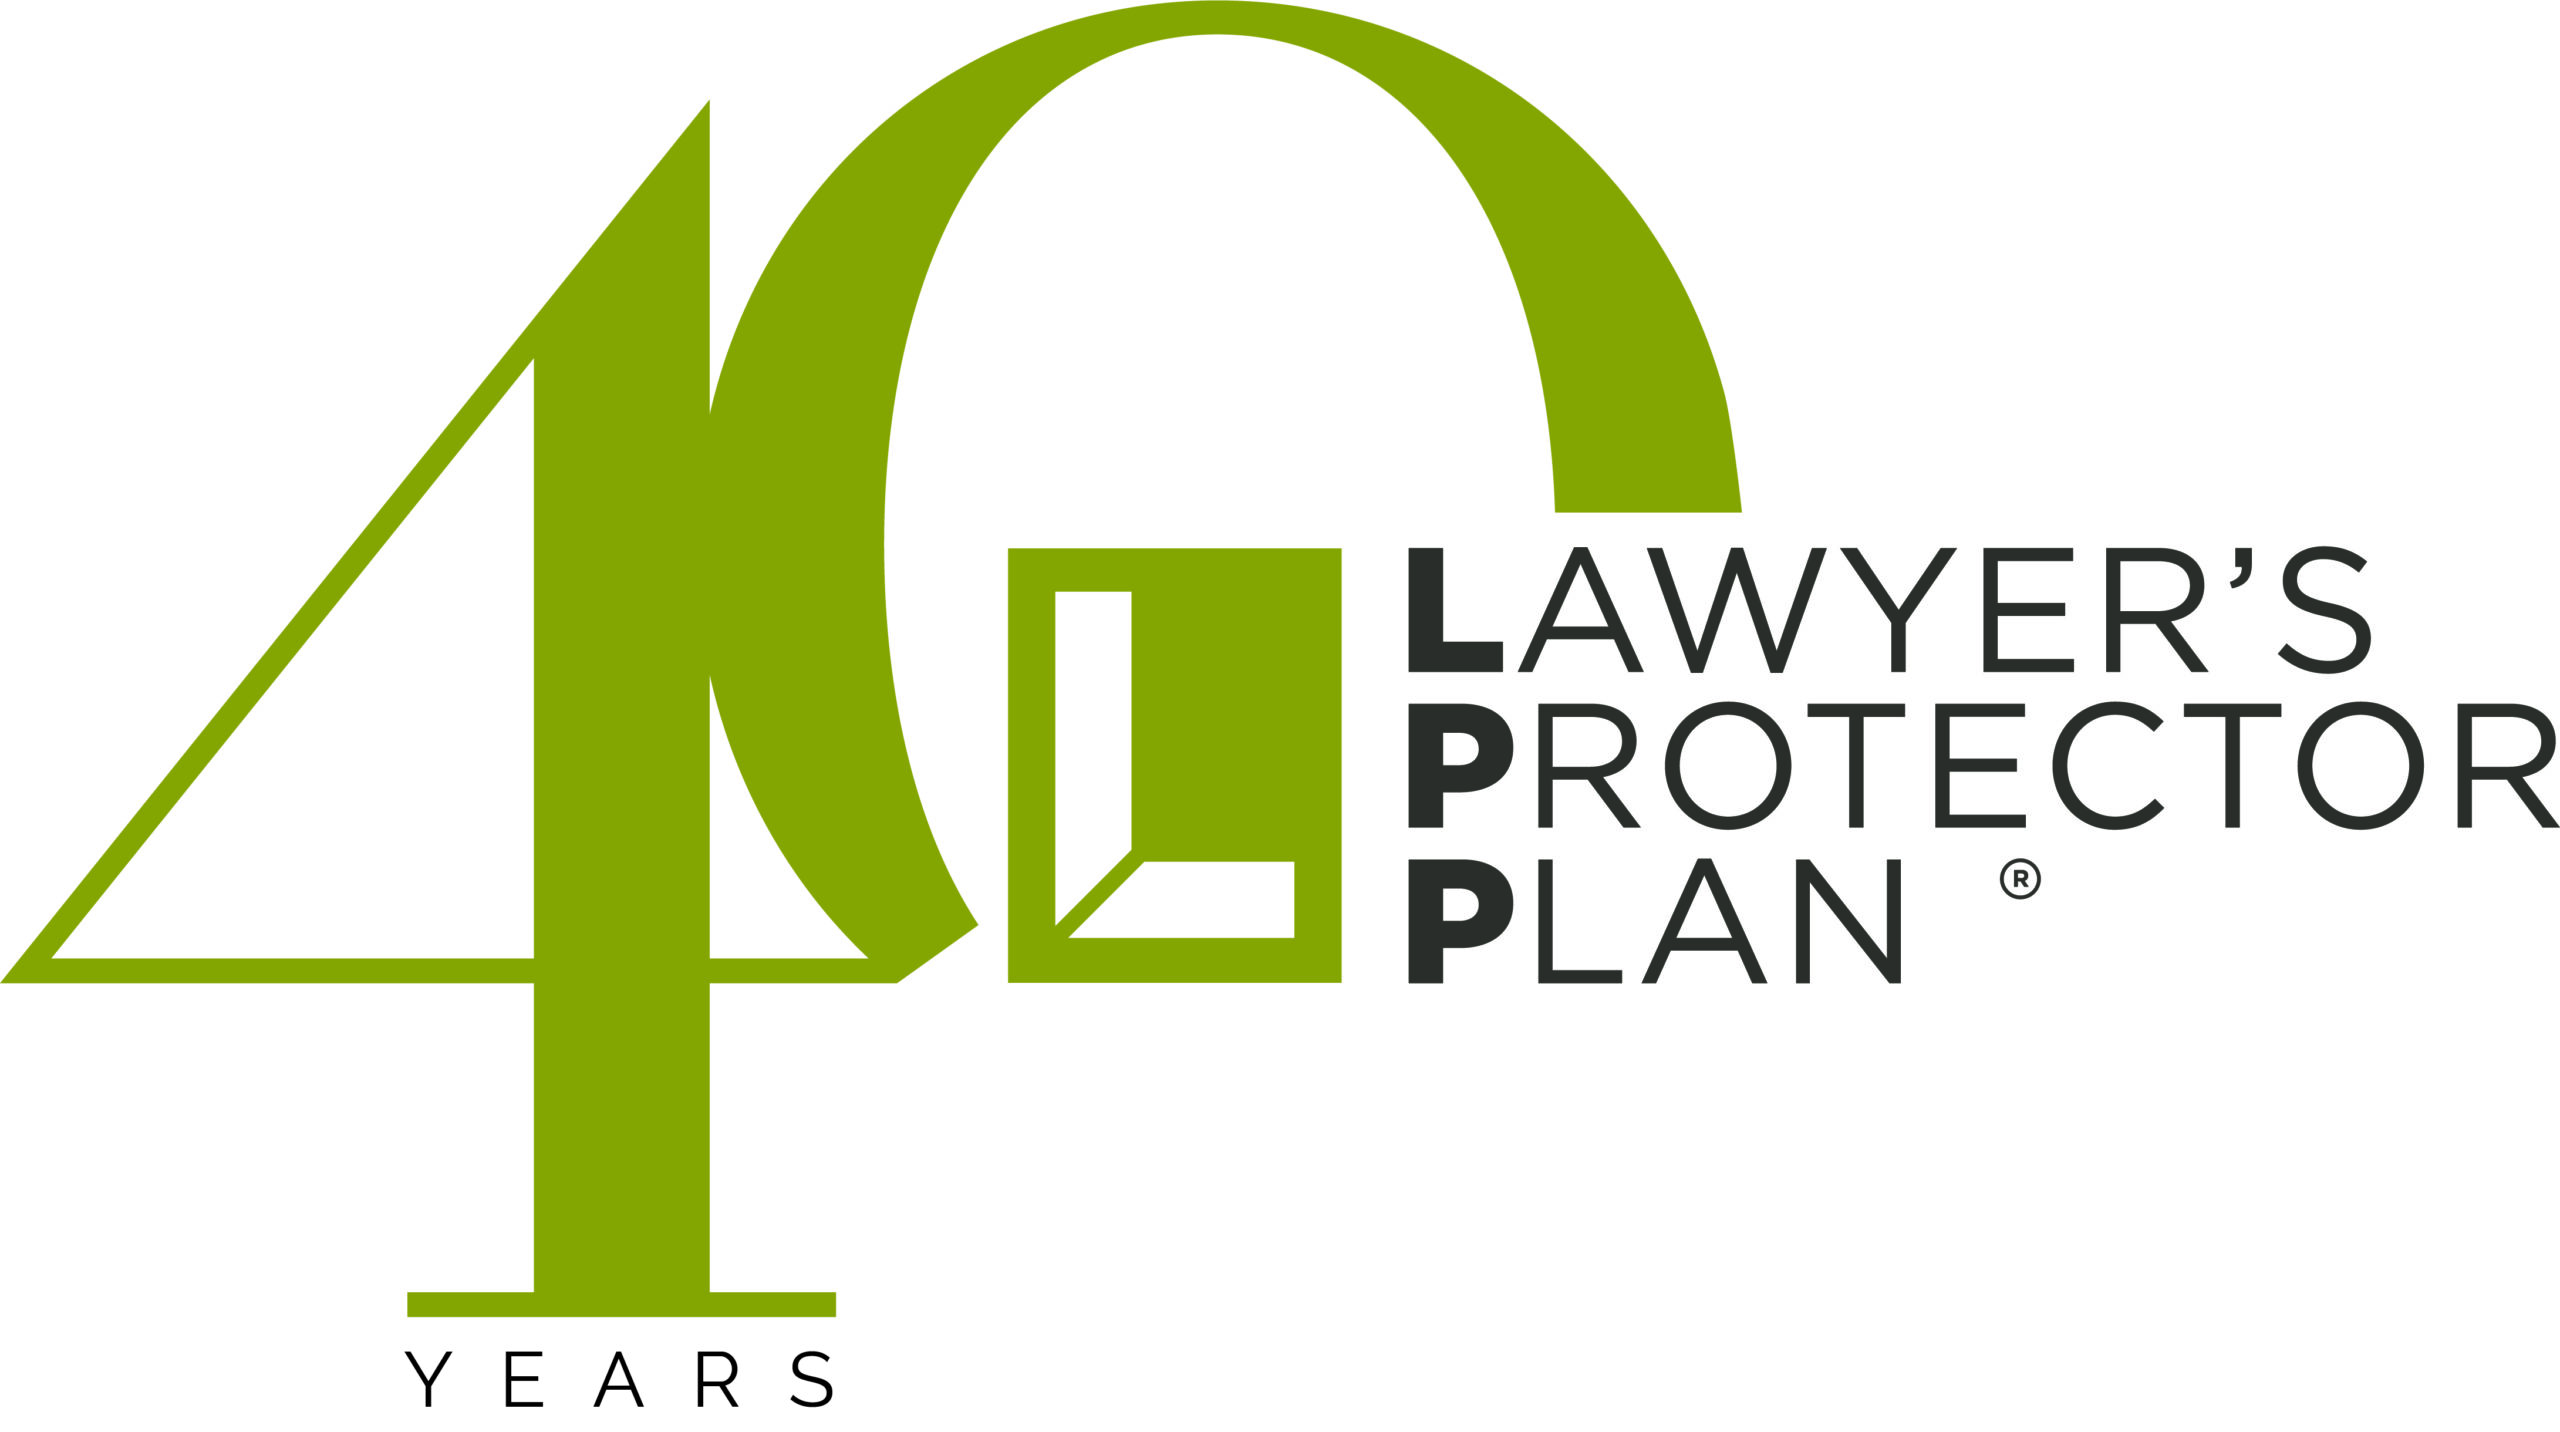 Lawyer's Protector Plan